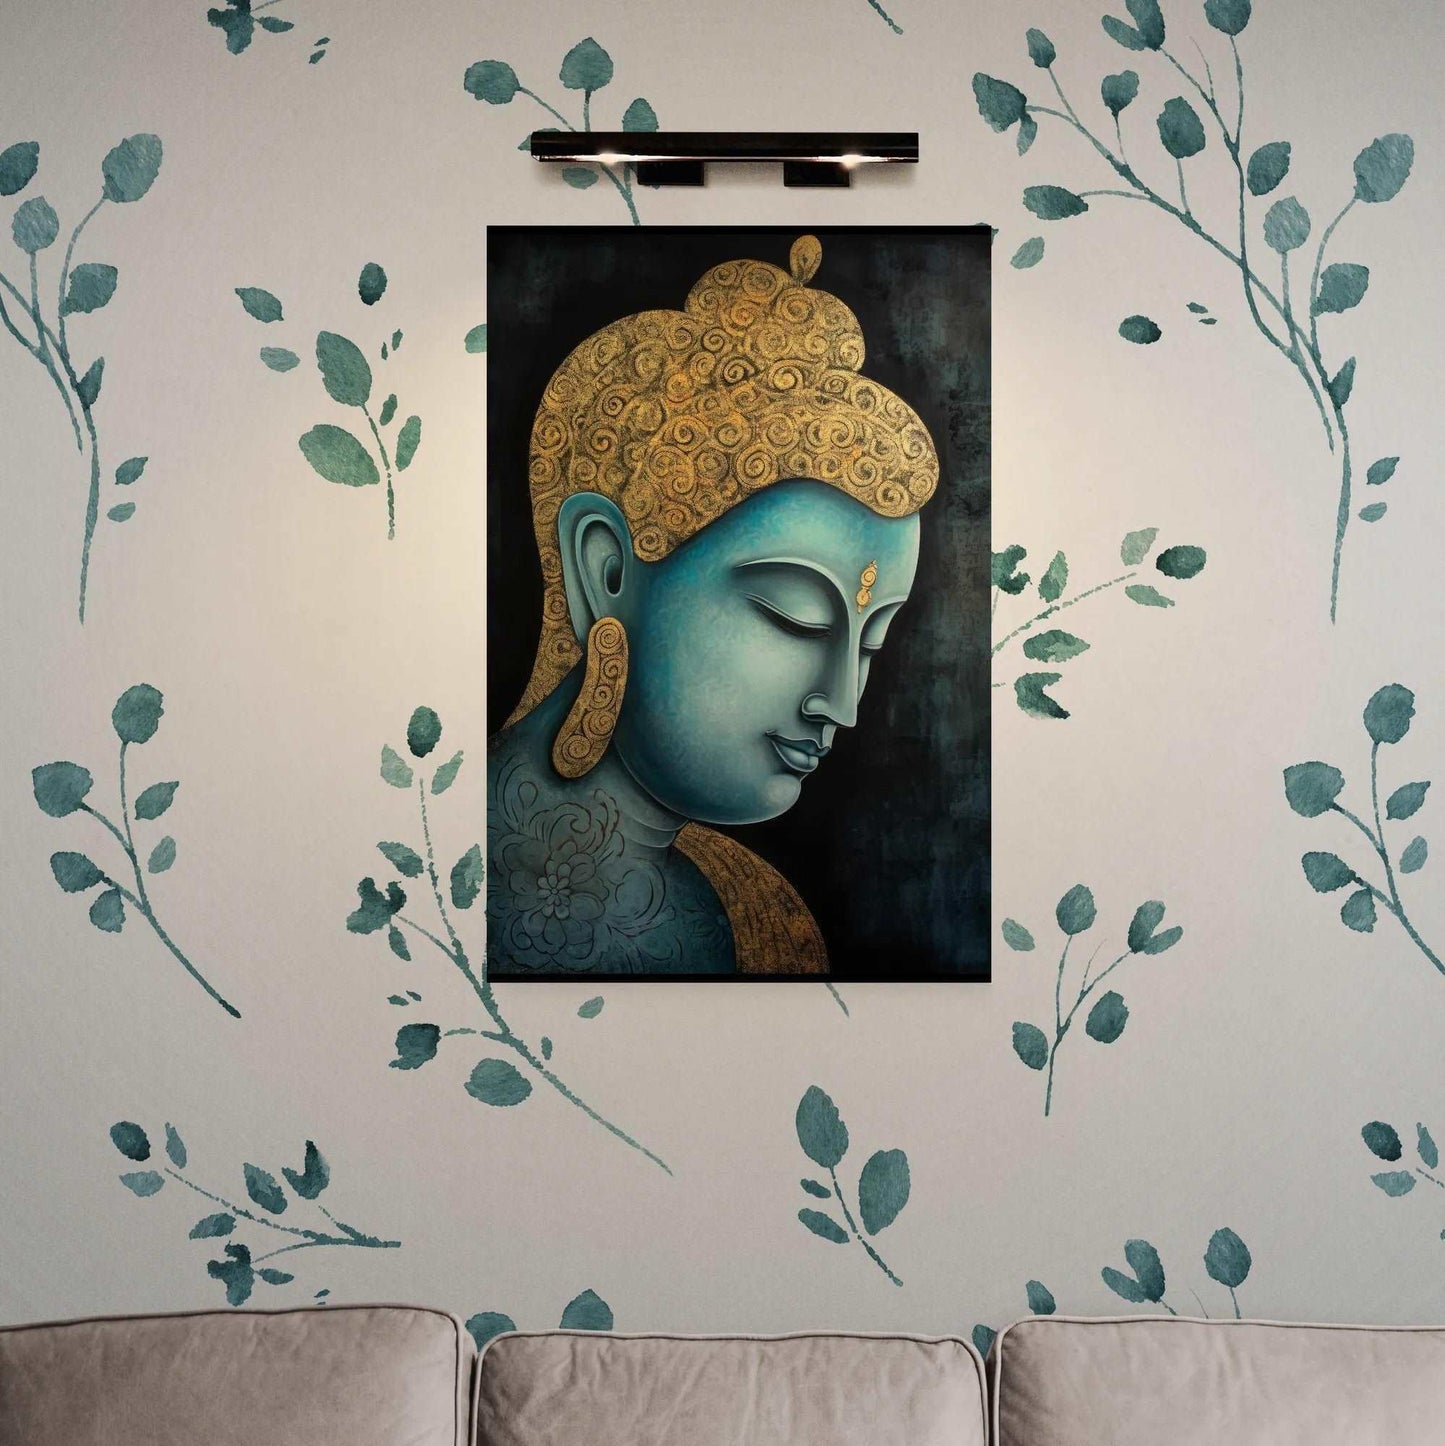 Elegant living room wall with leaf patterns, adorned with a blue and gold Buddha painting, creating a serene focal point above a gray sofa.